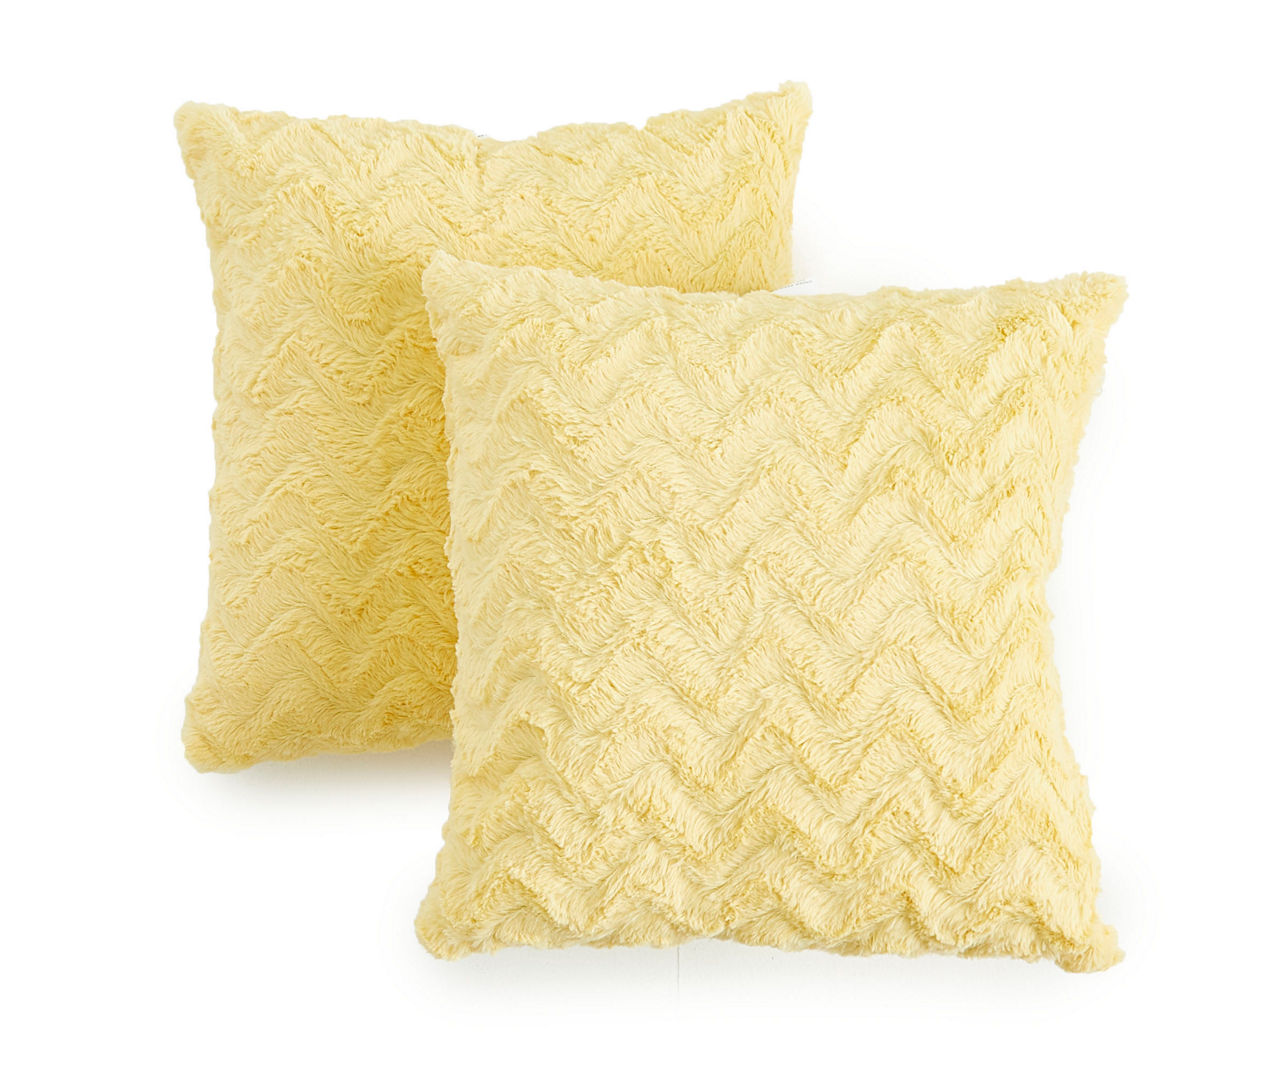 Real Living Wave Throw Pillow